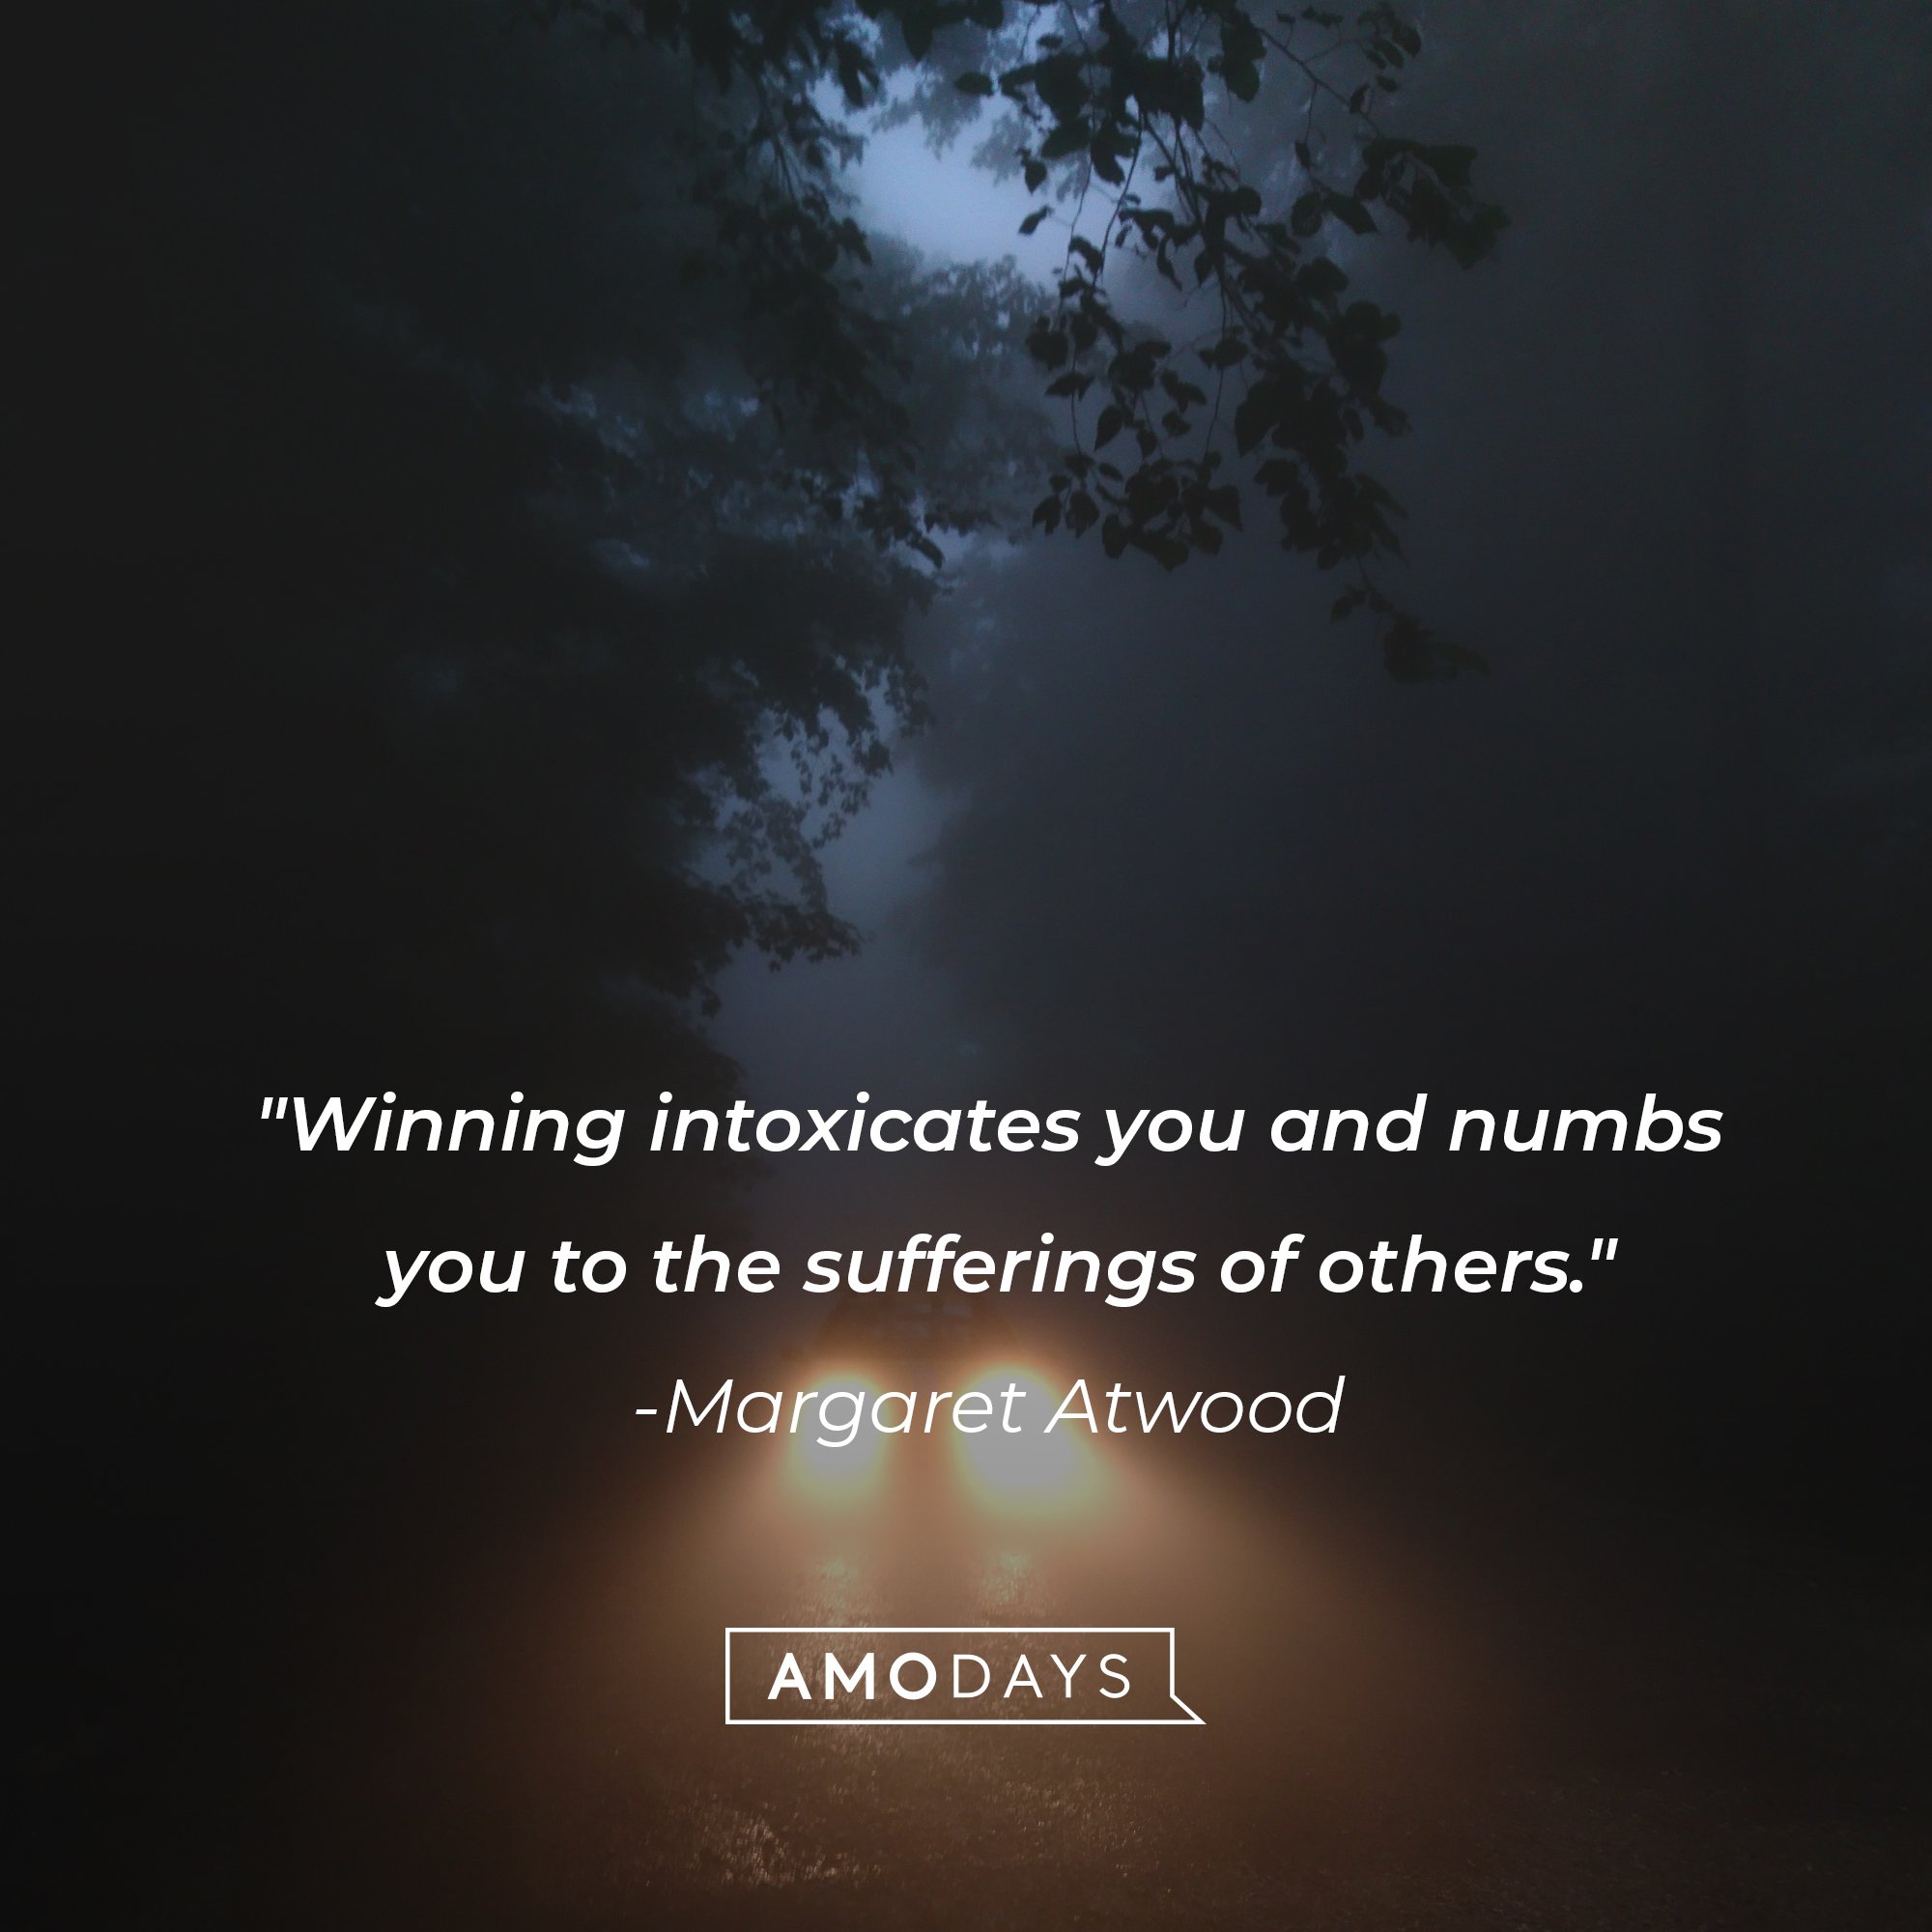 Margaret Atwood’s quote: "Winning intoxicates you and numbs you to the sufferings of others."  | Image: AmoDays 